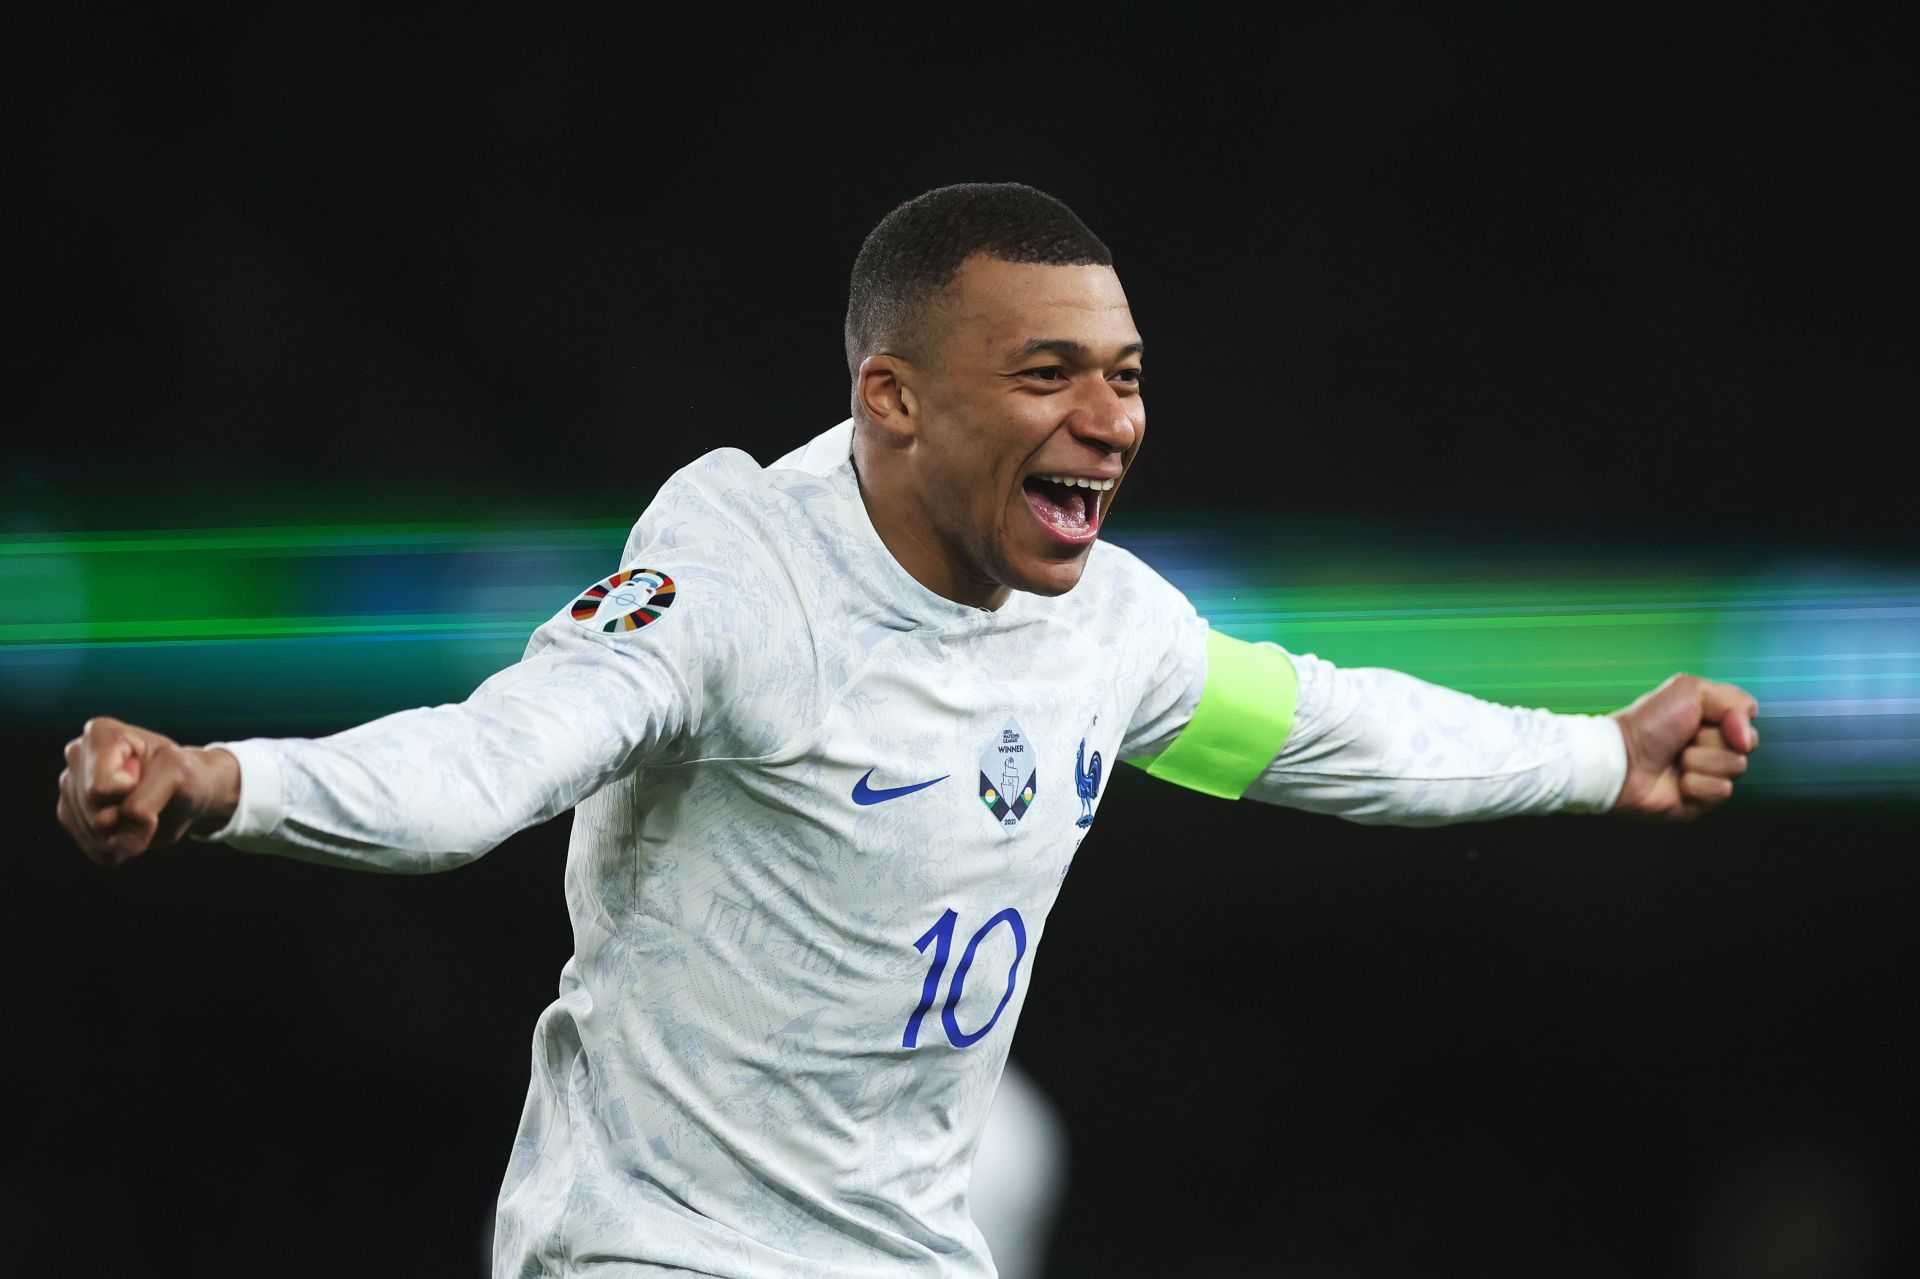 Mbappe is tasked with leading Les Bleus to glory in the future.